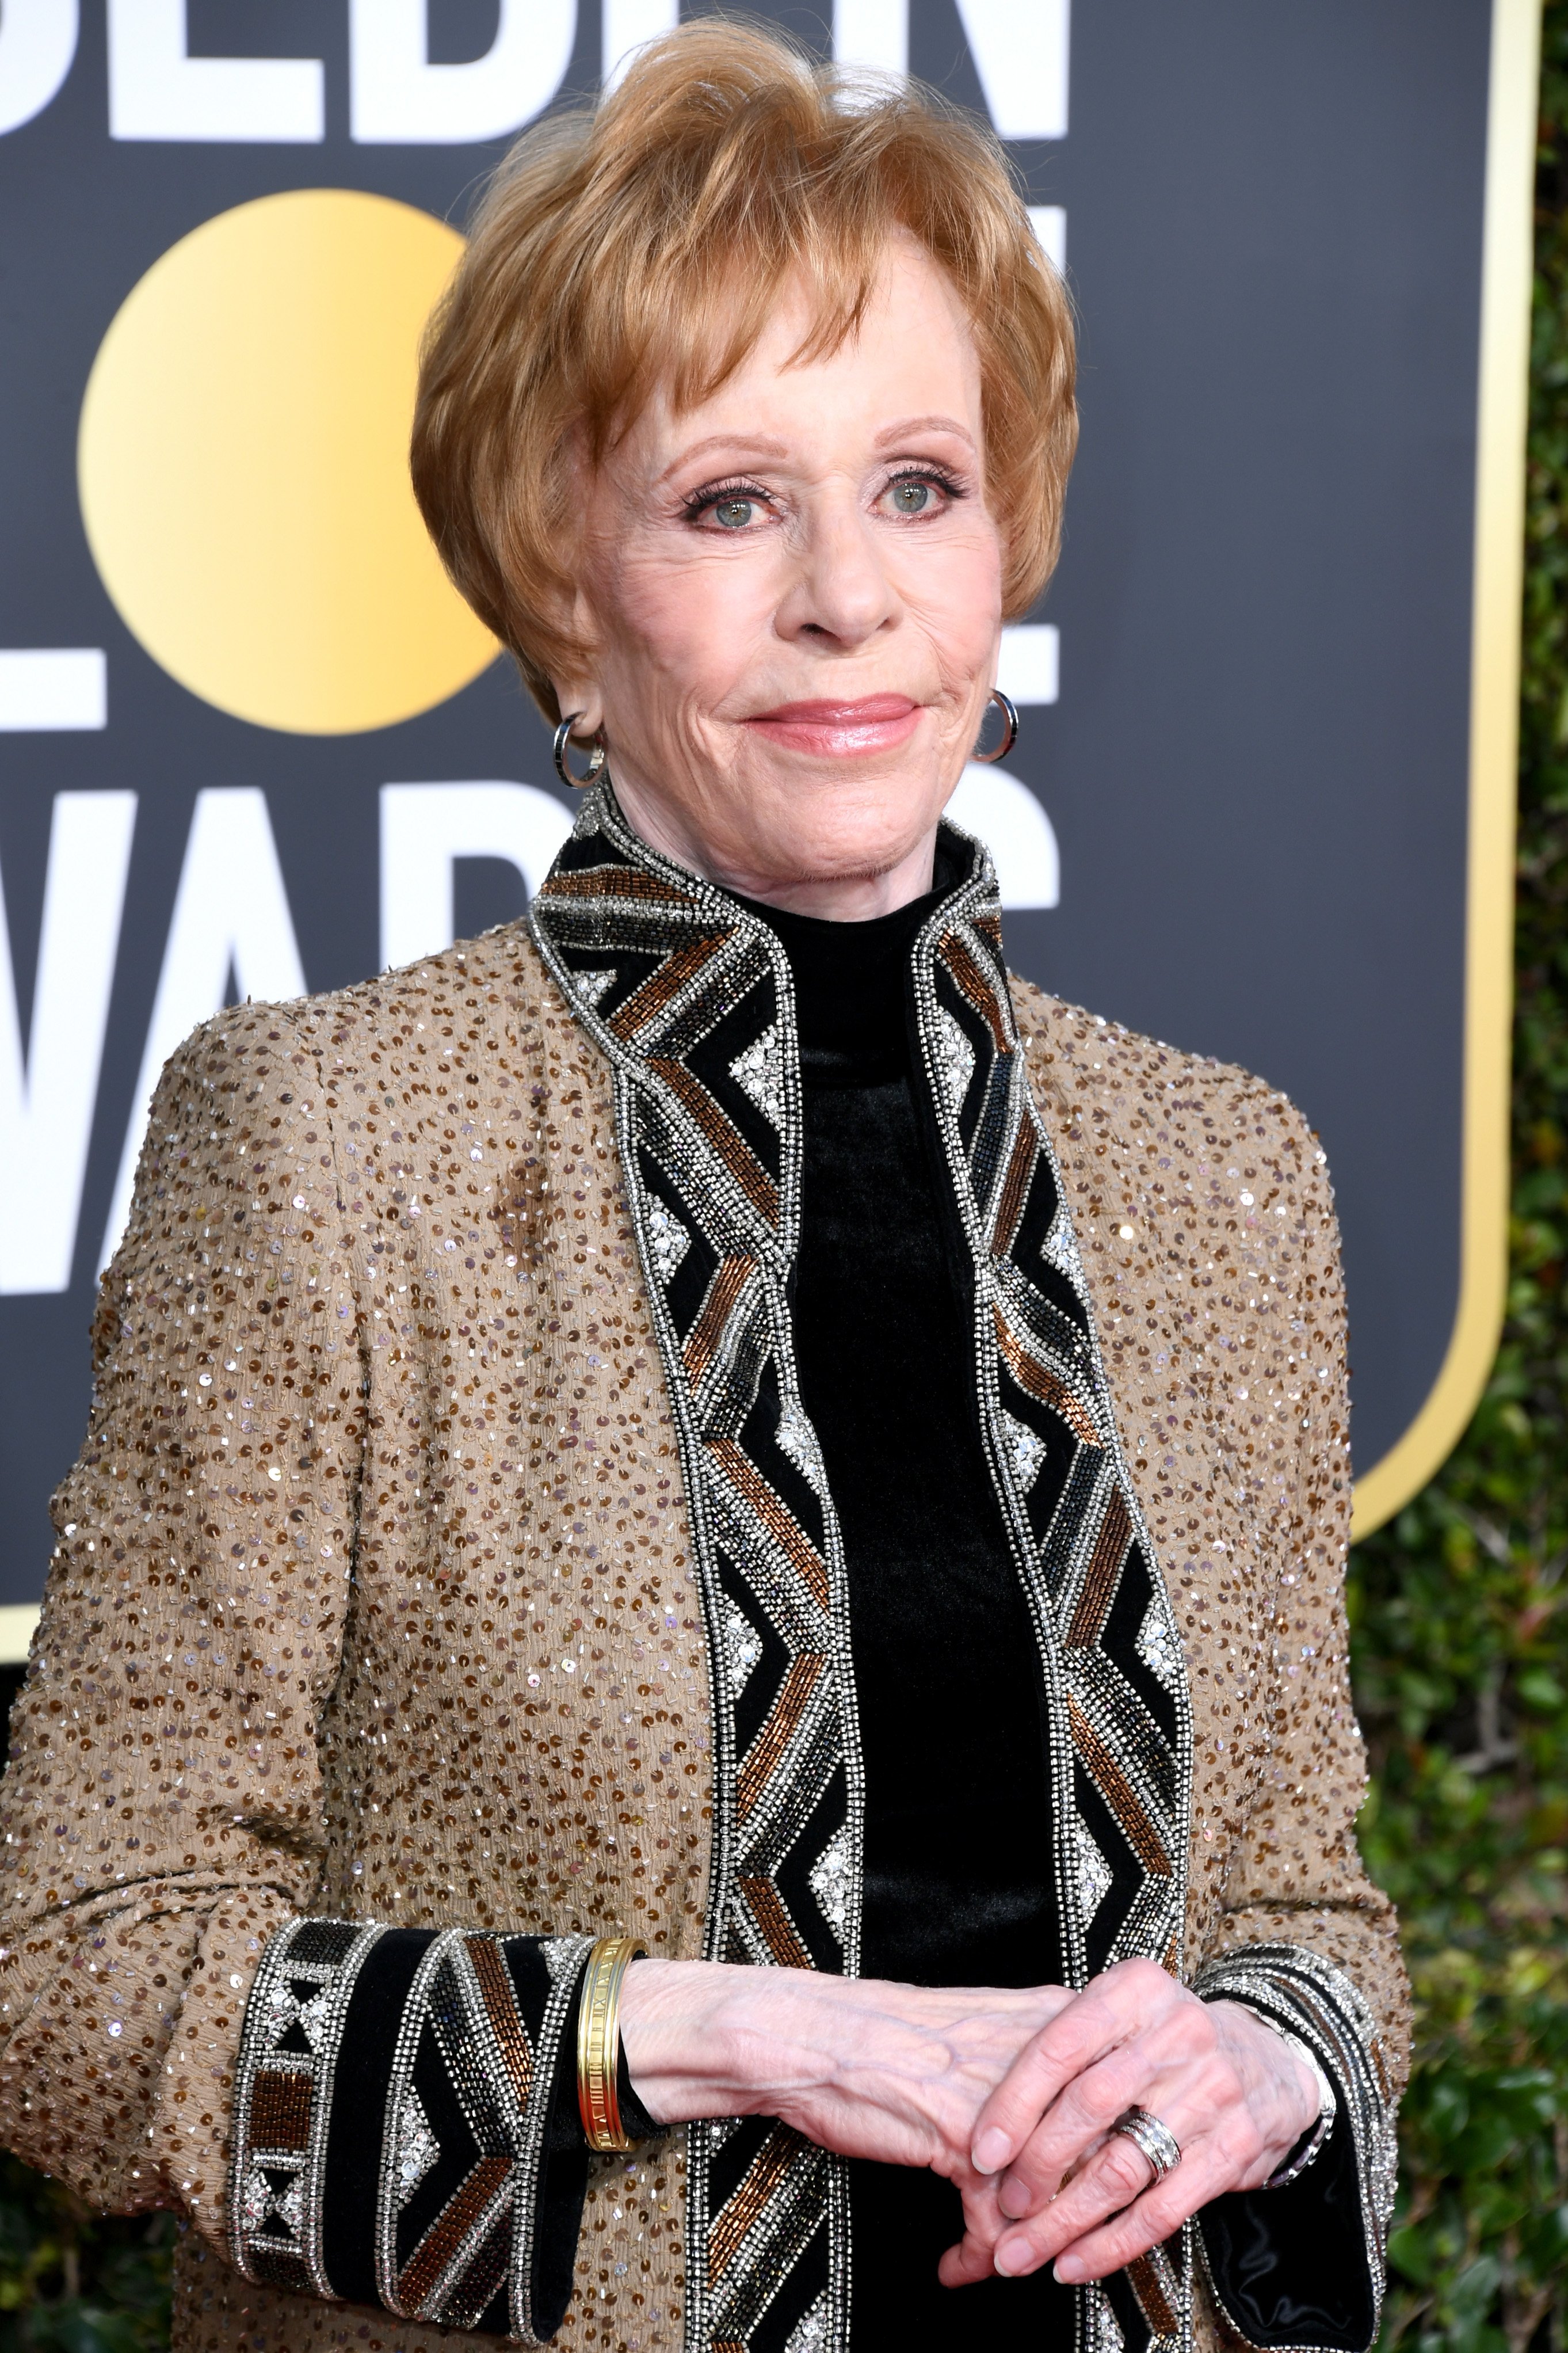 Carol Burnett attends the 76th Annual Golden Globe Awards at The Beverly Hilton Hotel on January 6, 2019. | Source: Getty Images